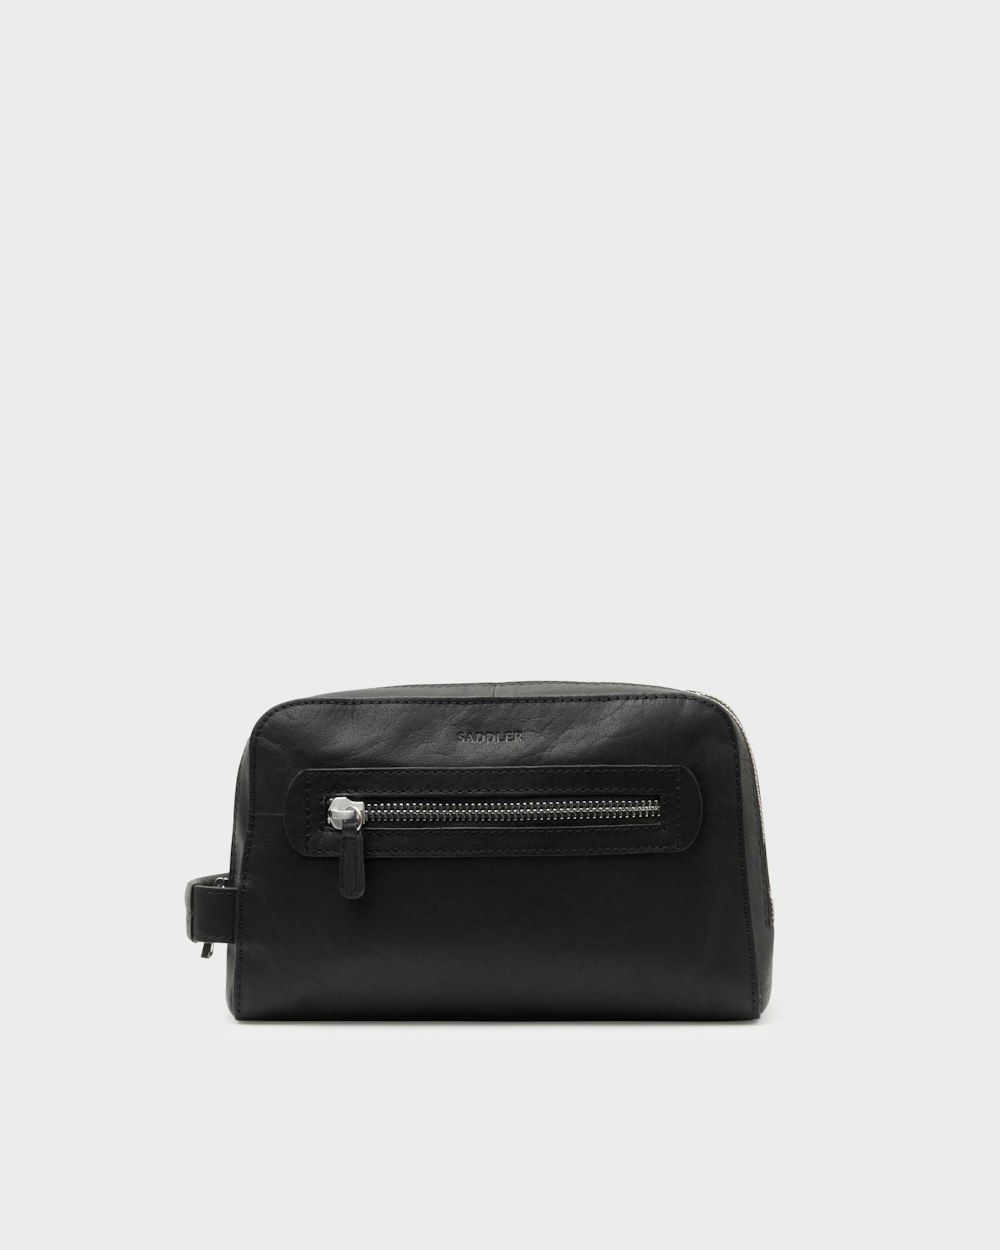 King Size Toiletry Bag, Small Leather Goods - Designer Exchange